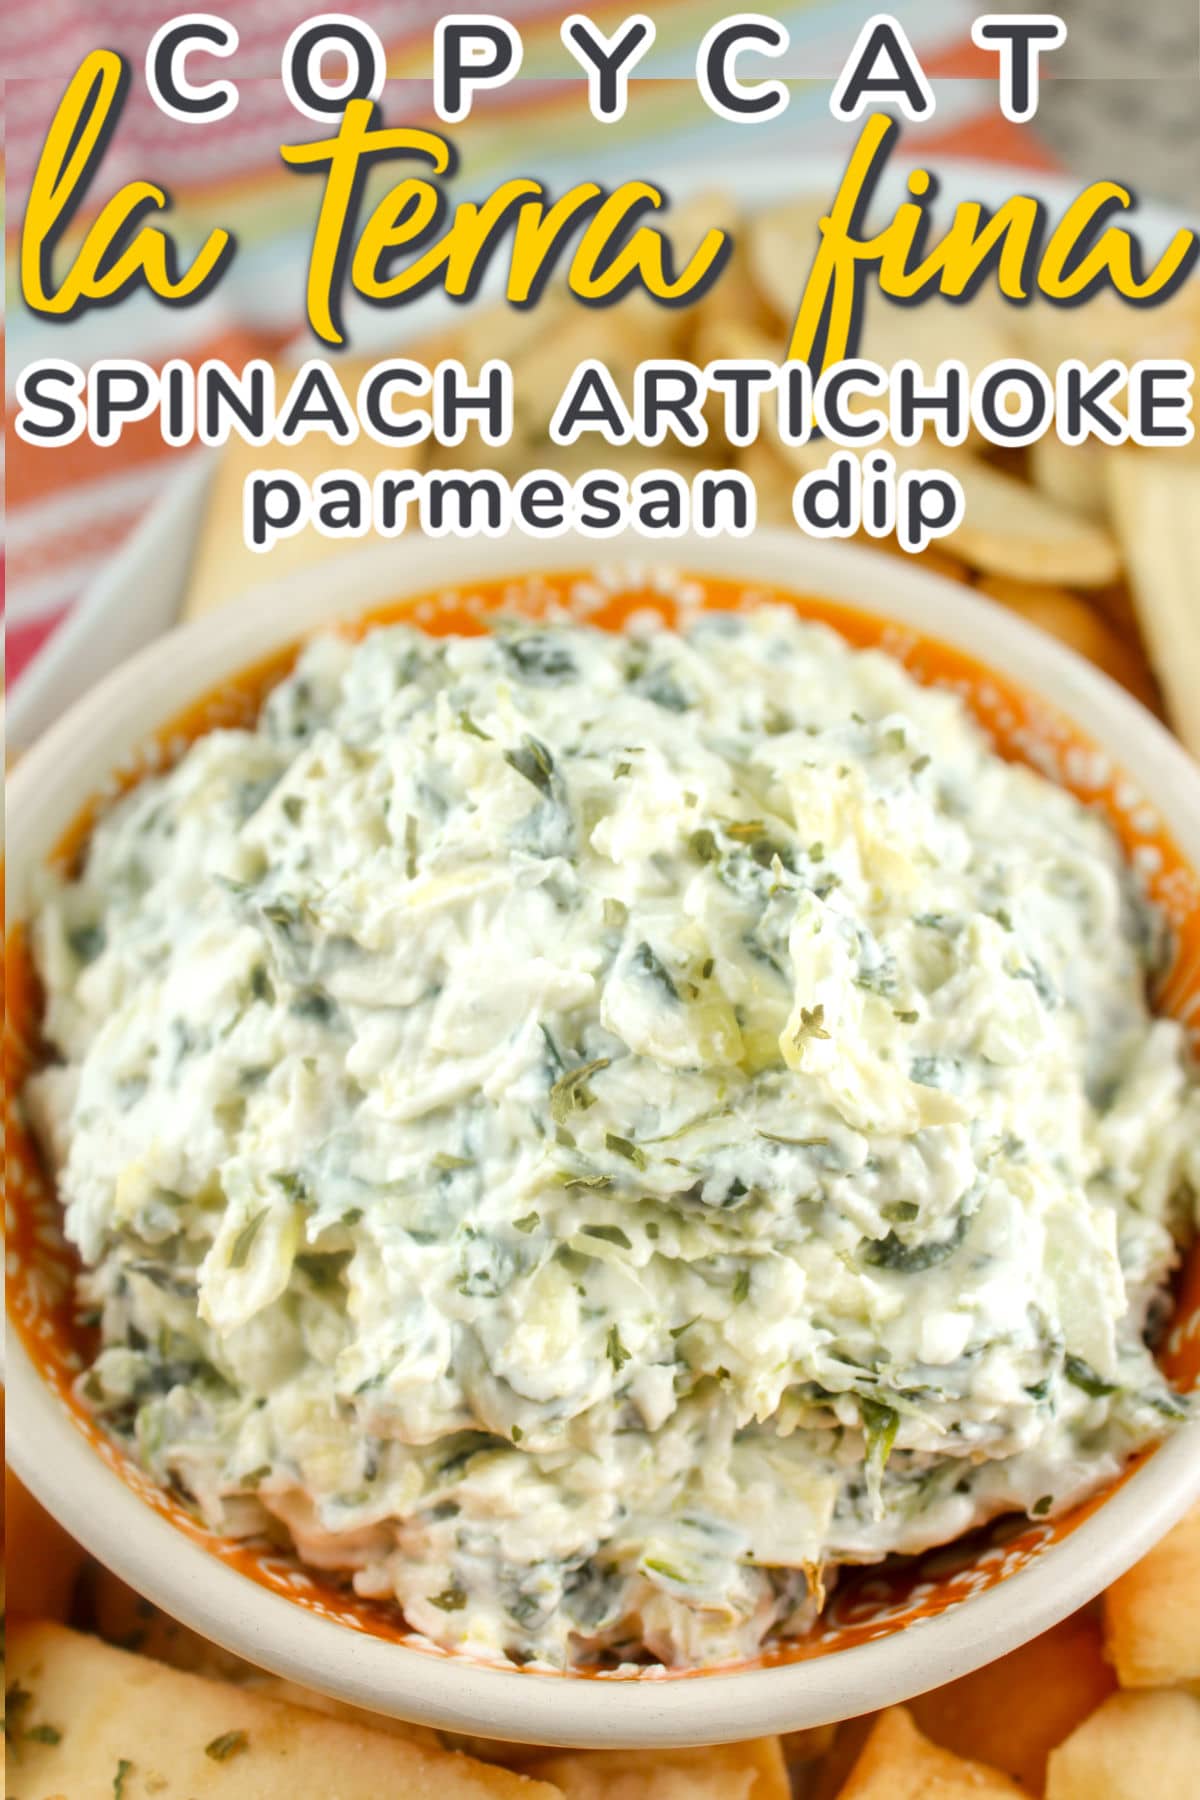 I love Spinach Artichoke Dip - especially La Terra Fina's dip! It's at a lot of grocery stores but I decided to make my own at home and it was super simple and delicious. The best part is - I have a great idea for using up the leftovers too!  via @foodhussy